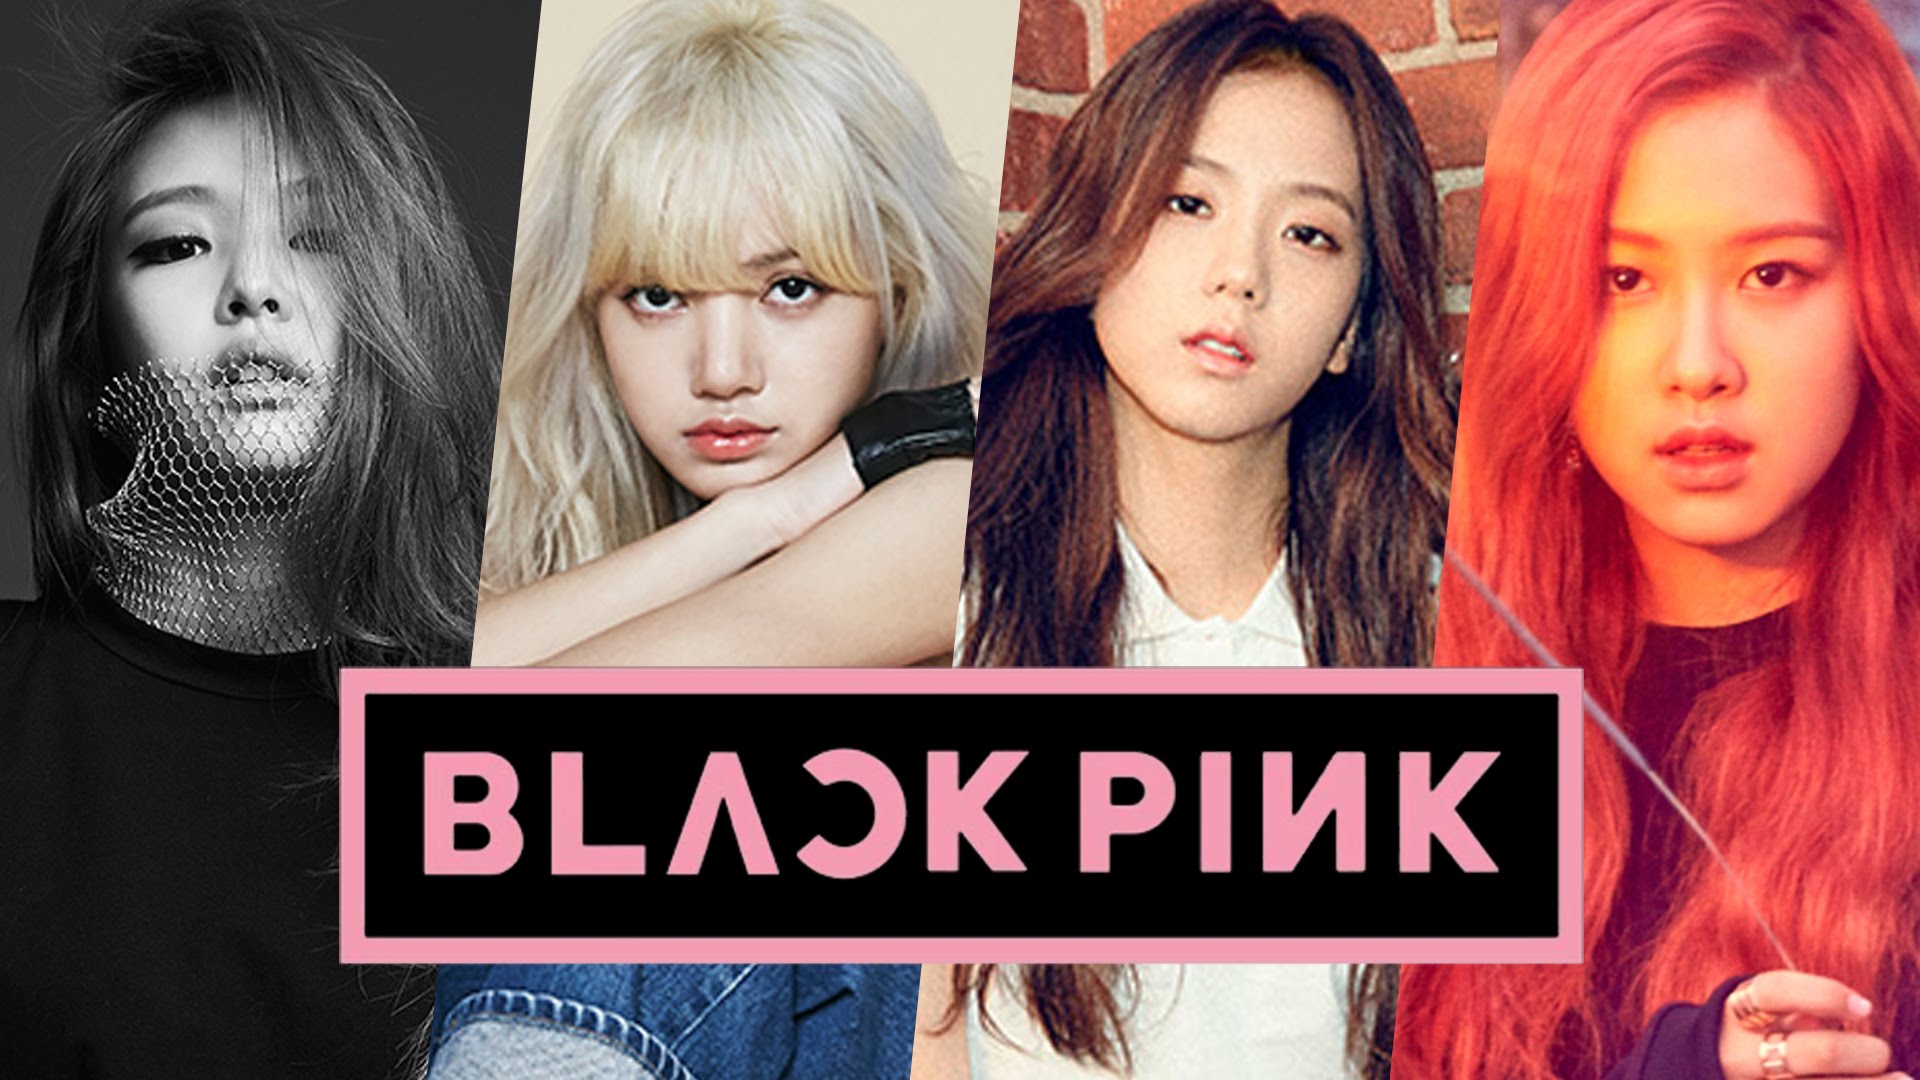 Black Pink Image Blackpink HD Wallpaper And Background Photos